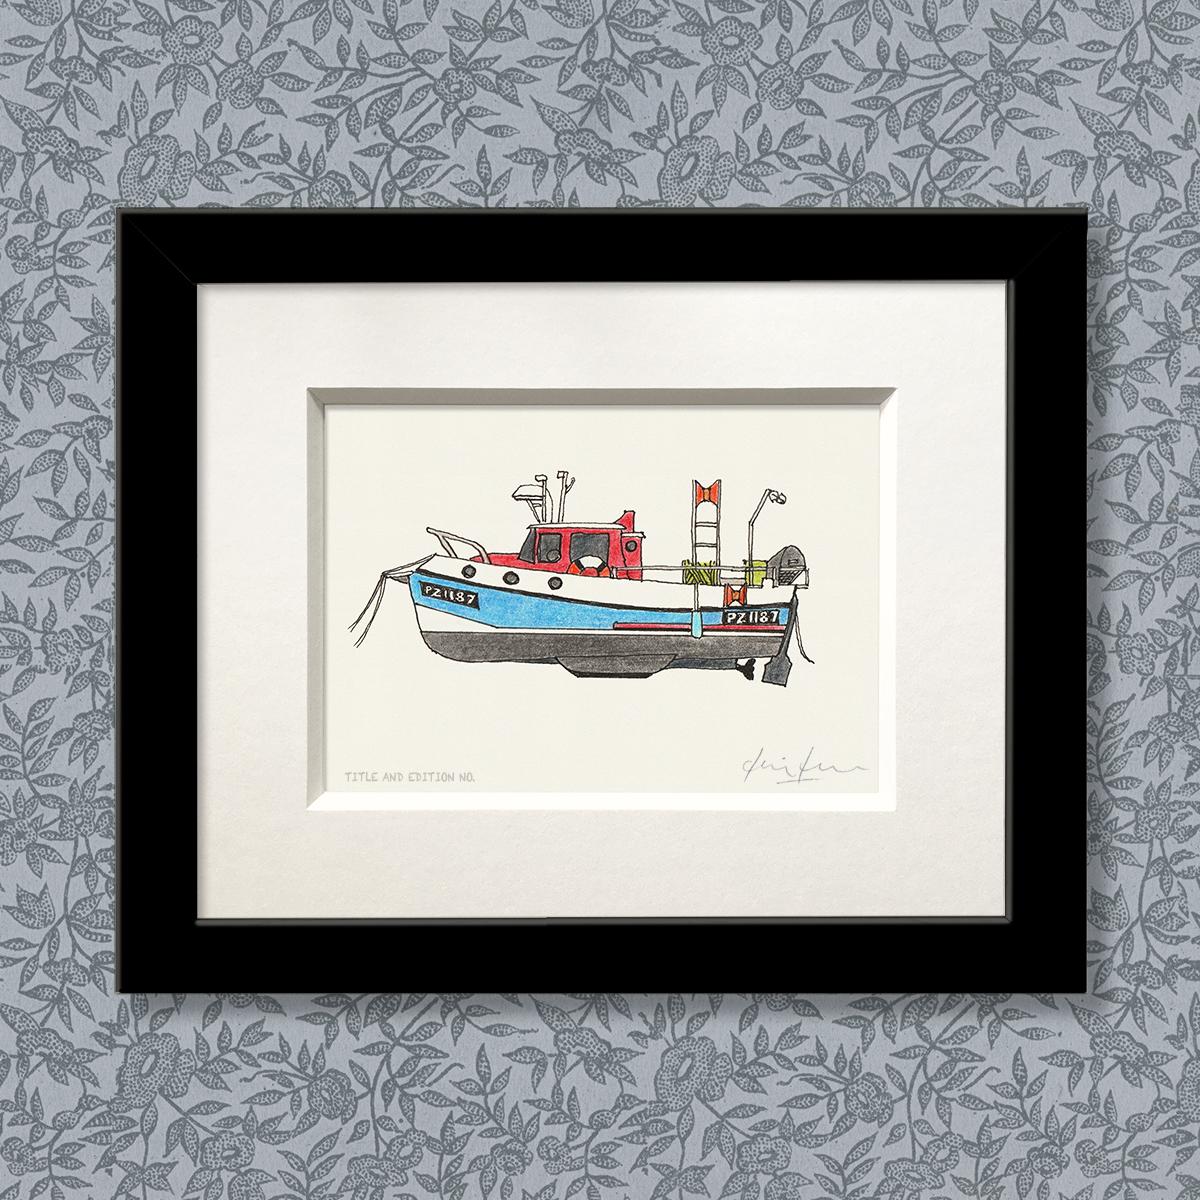 Limited edition print from pen and ink drawing of a fishing boat in a black frame